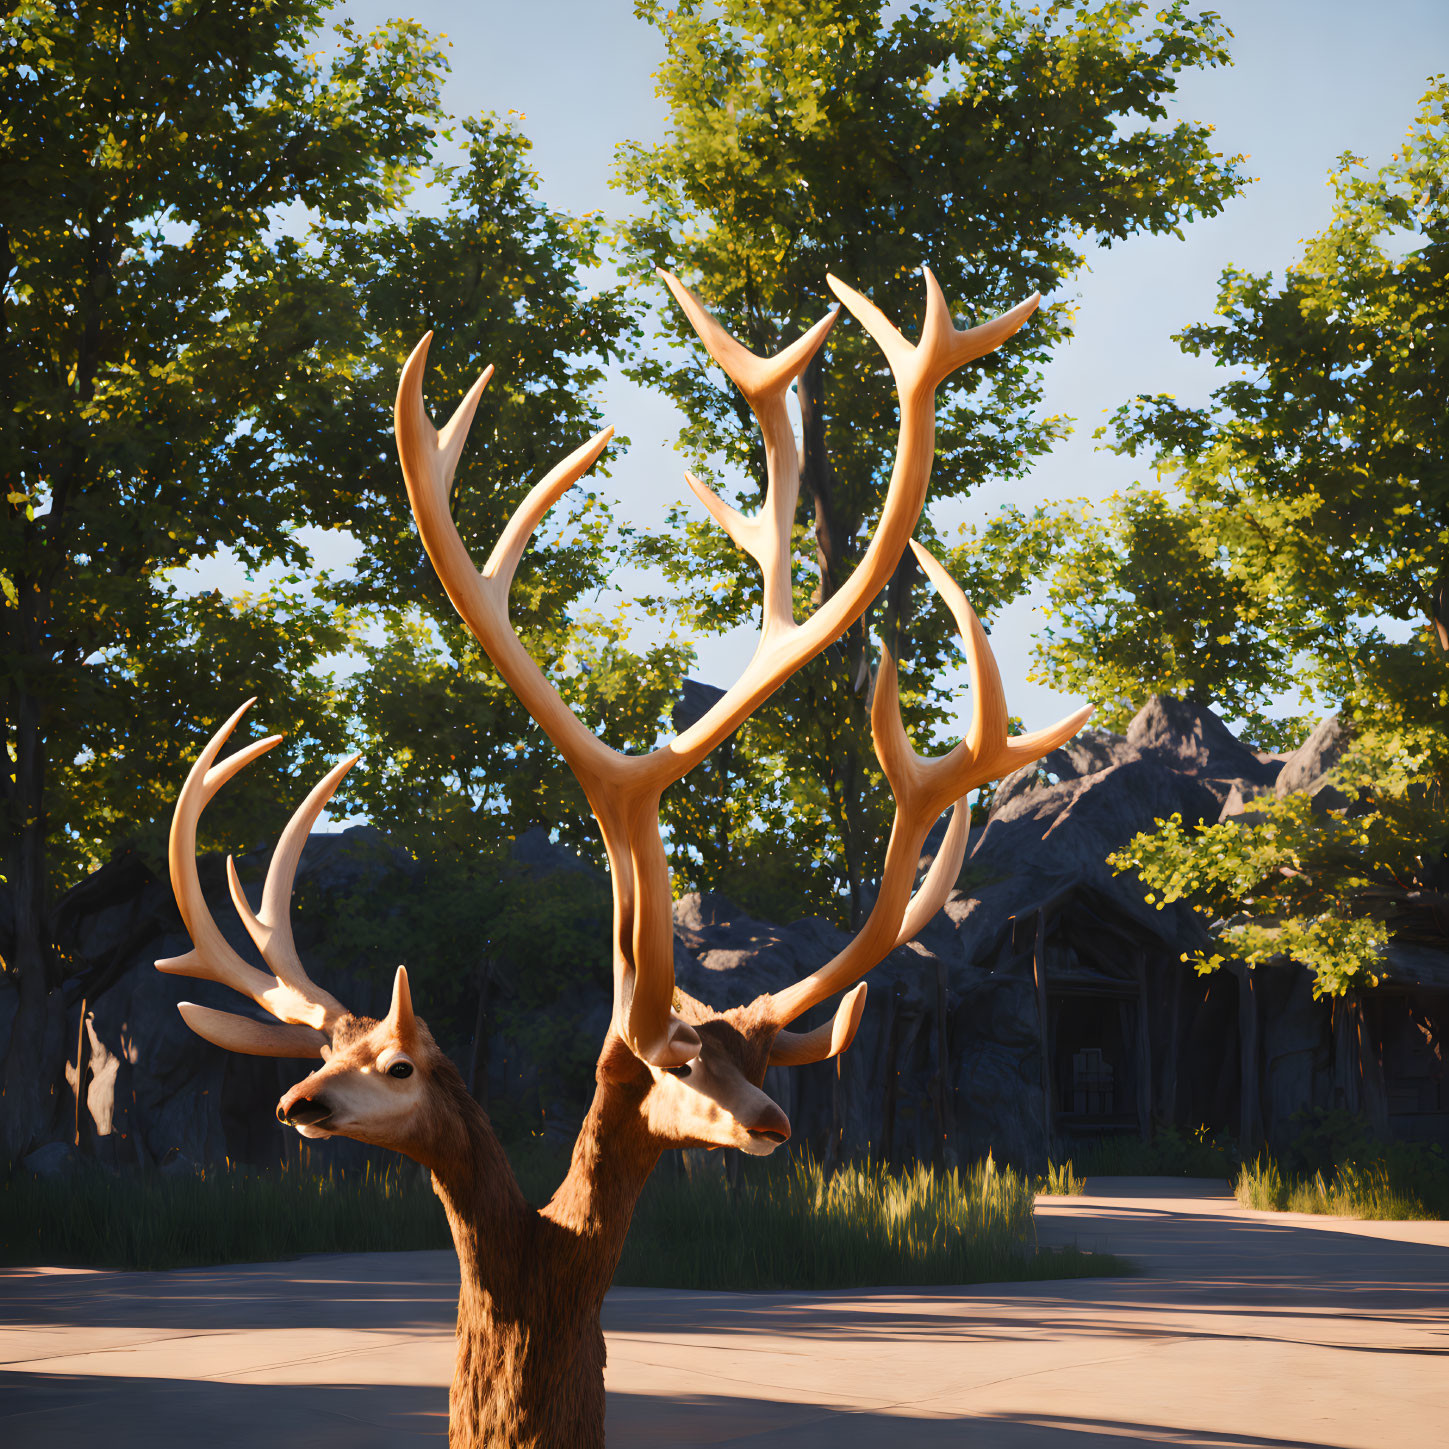 Majestic stags with towering antlers in lush forest setting